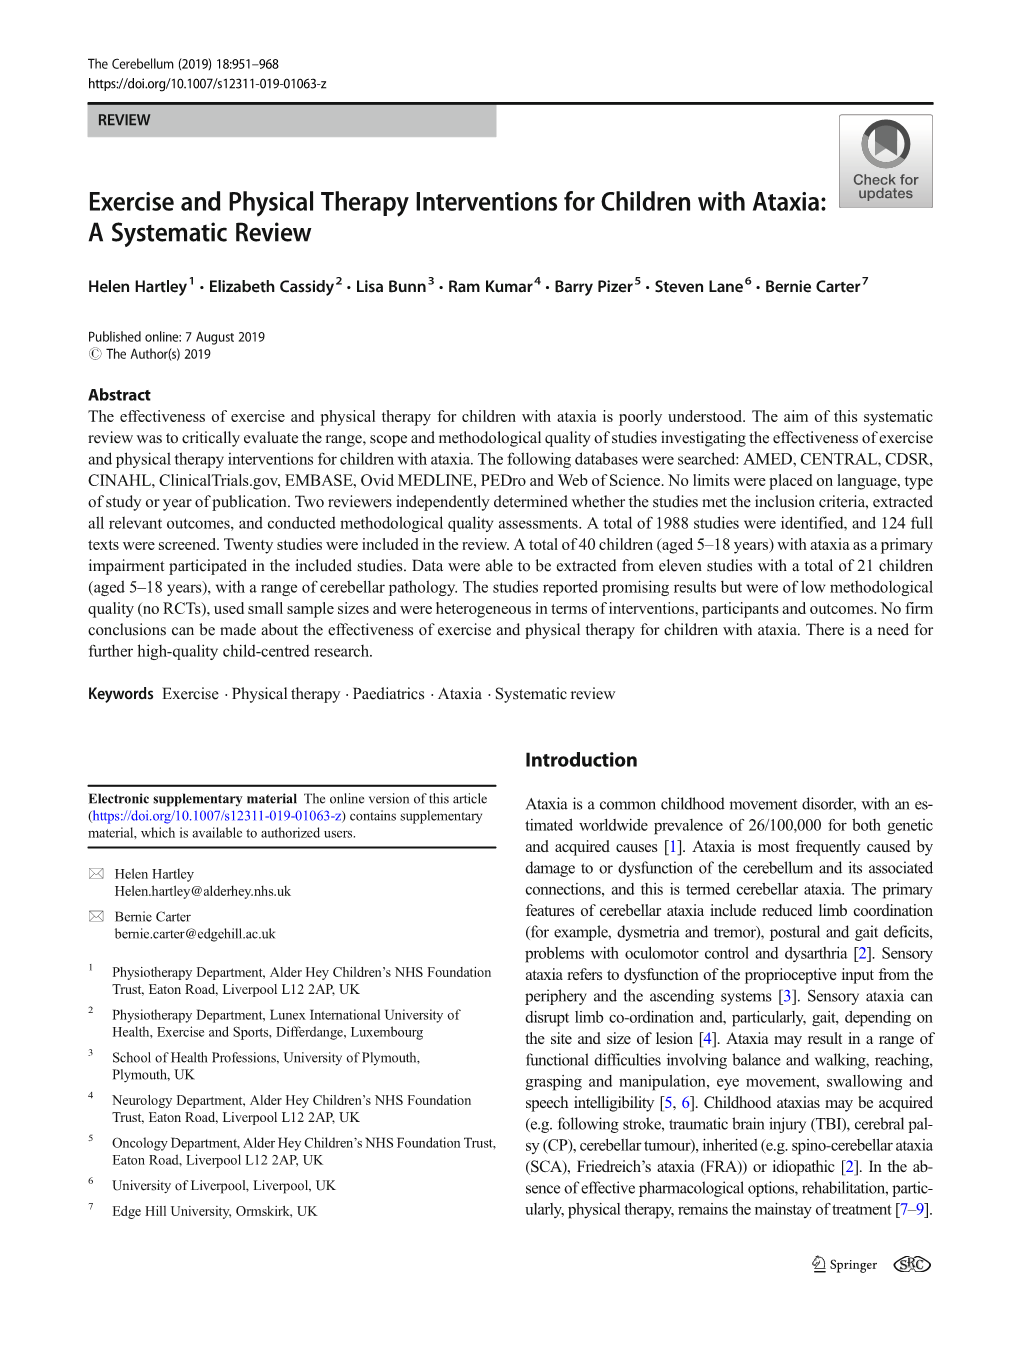 Exercise and Physical Therapy Interventions for Children with Ataxia: a Systematic Review